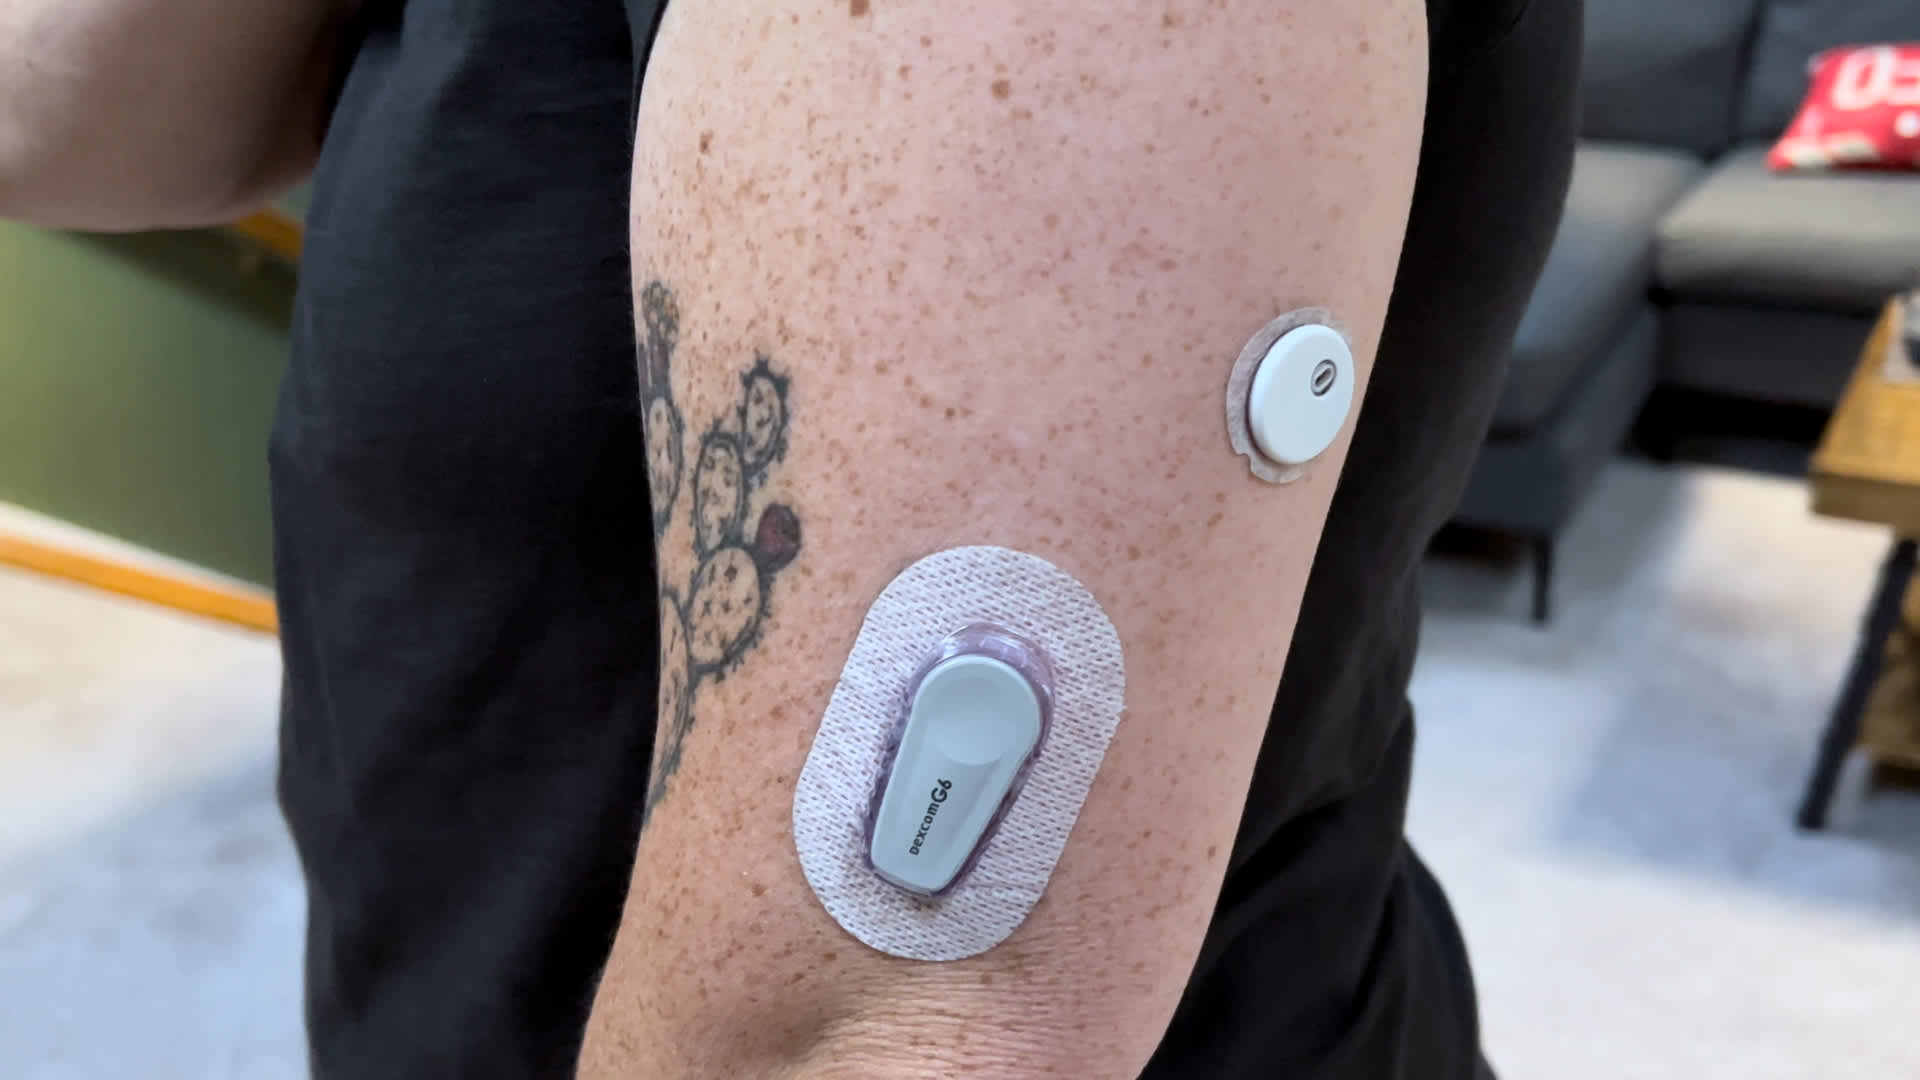 Dexcom announces its first-ever over-the-counter CGM Stelo has been cleared by the FDA 